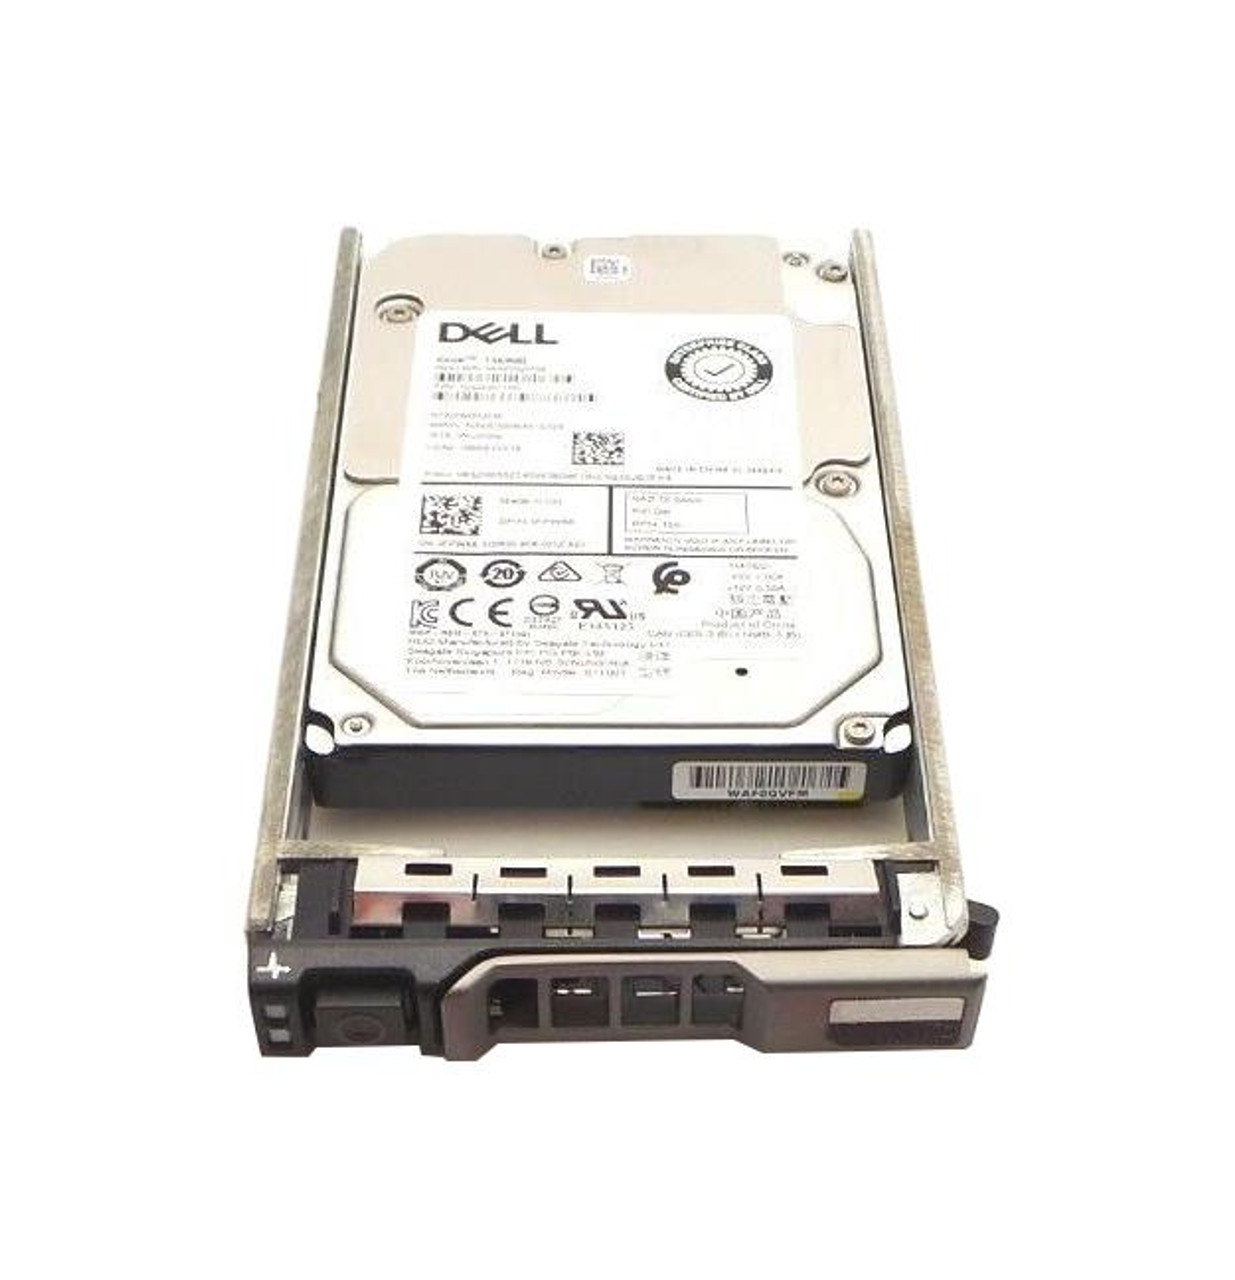 400-AOXZ Dell 300GB 10000RPM SAS 12Gbps Hot Swap (512n) 2.5-inch Internal Hard Drive with Tray